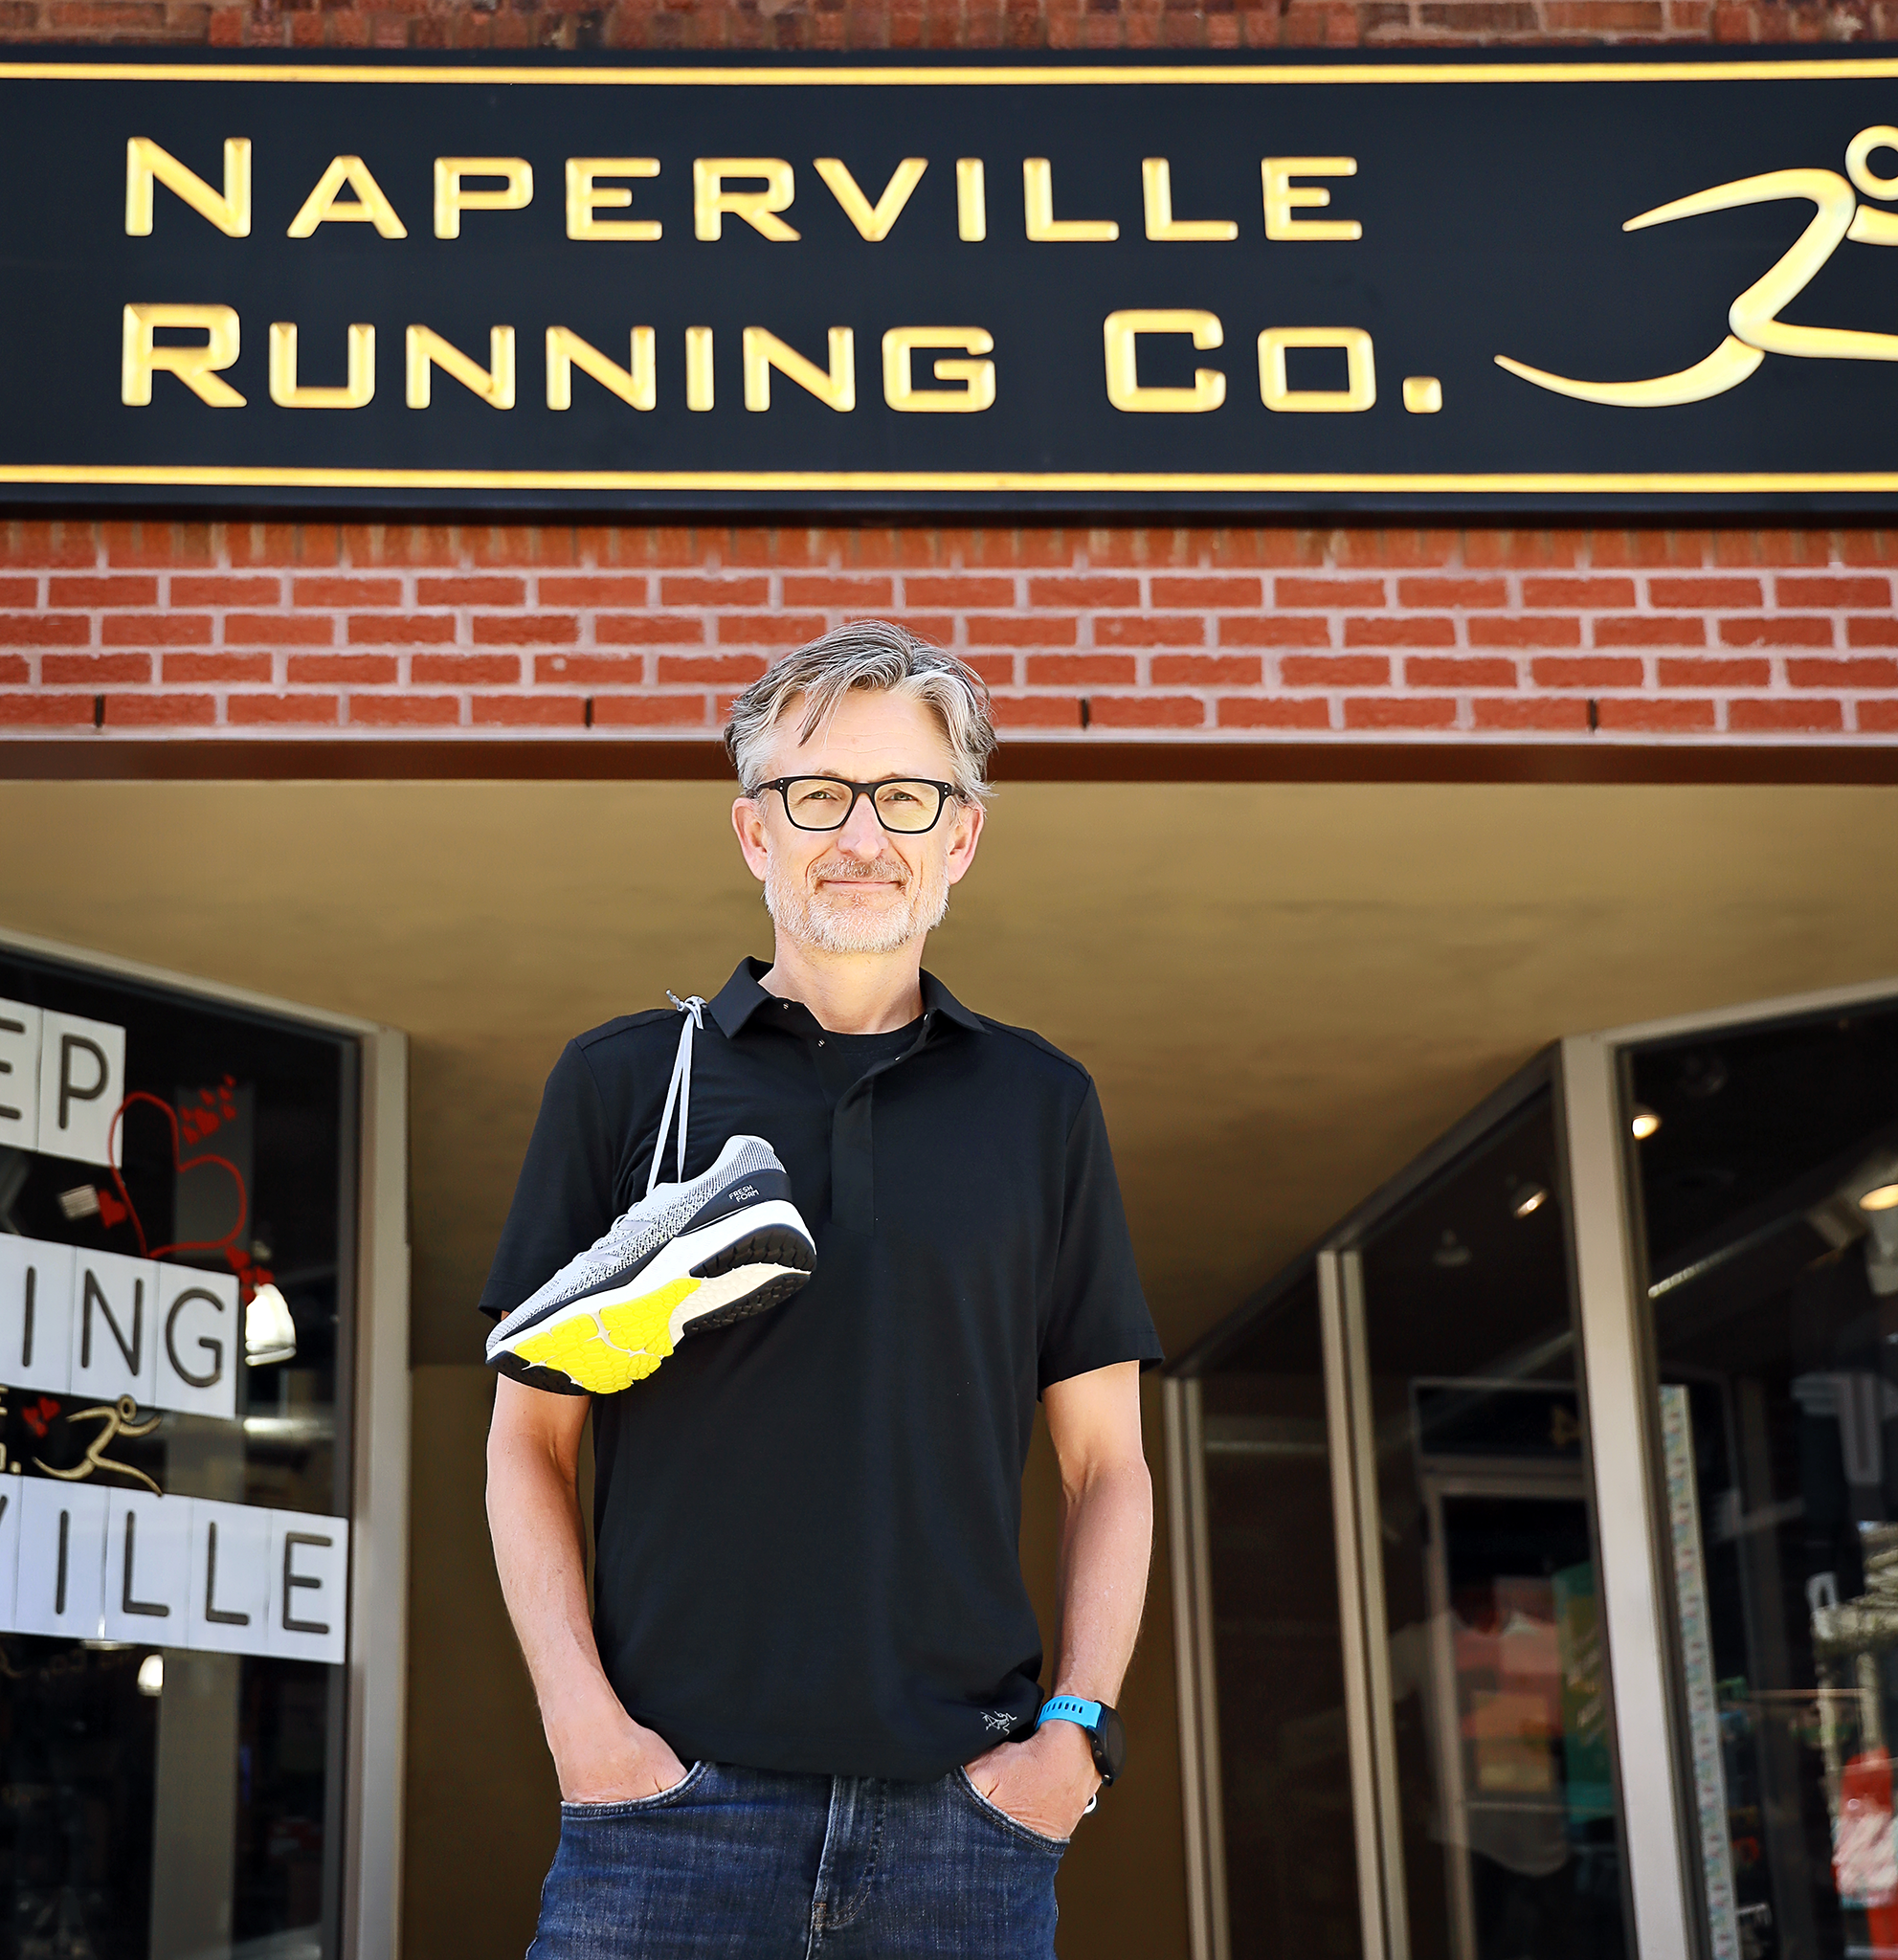 the running company naperville